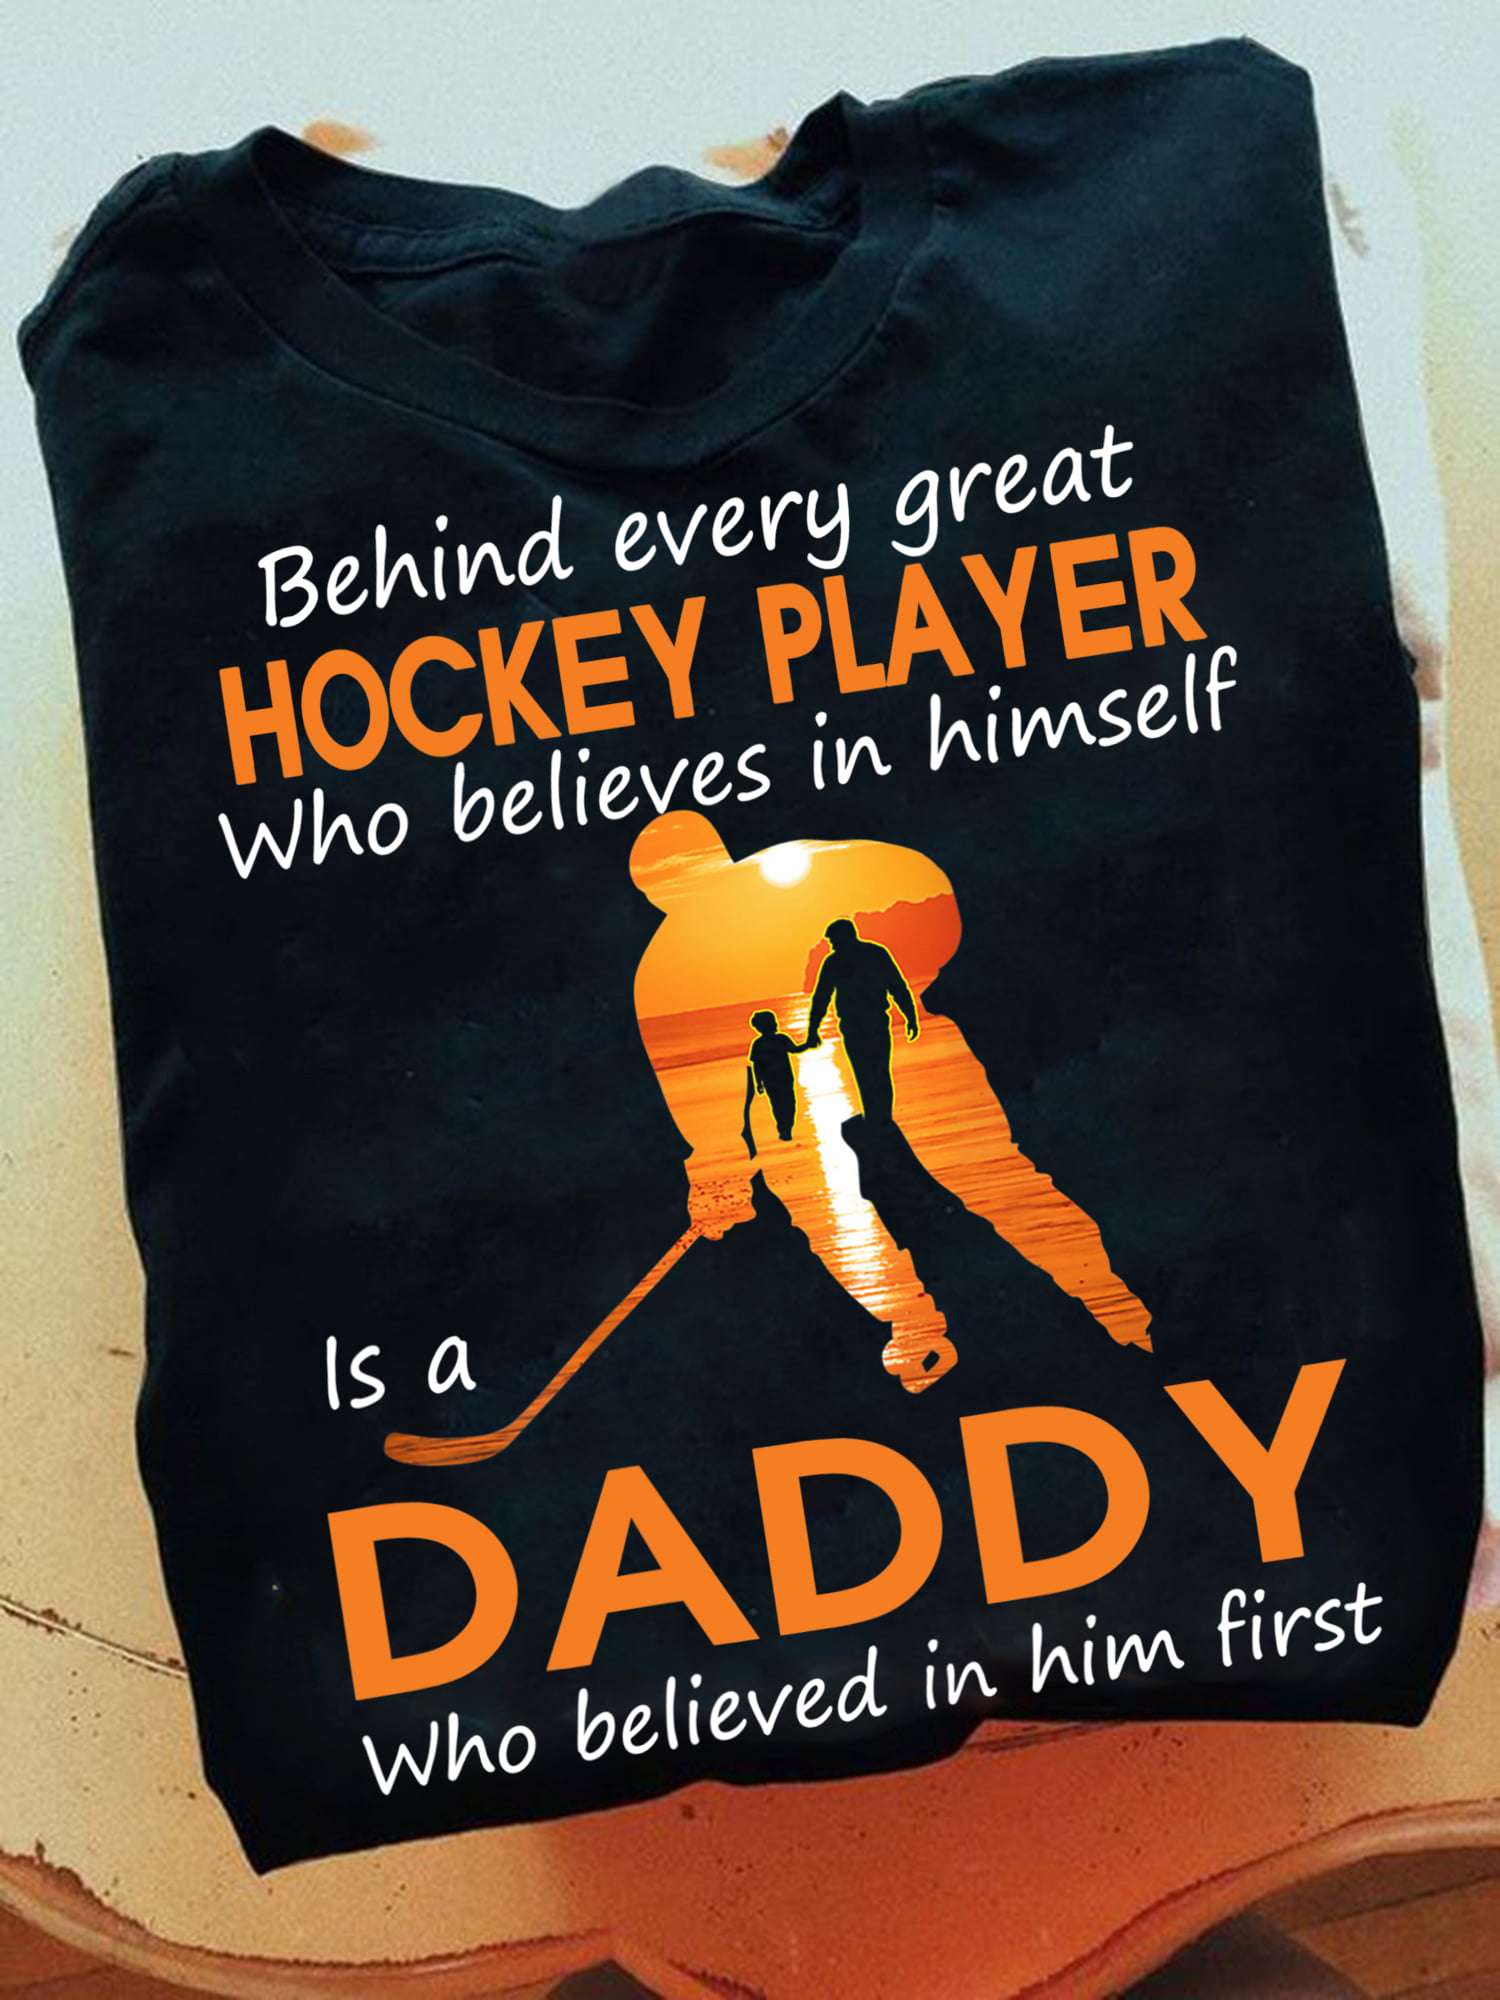 Behind every great hockey player who believes in himself is a daddy who believed in him first